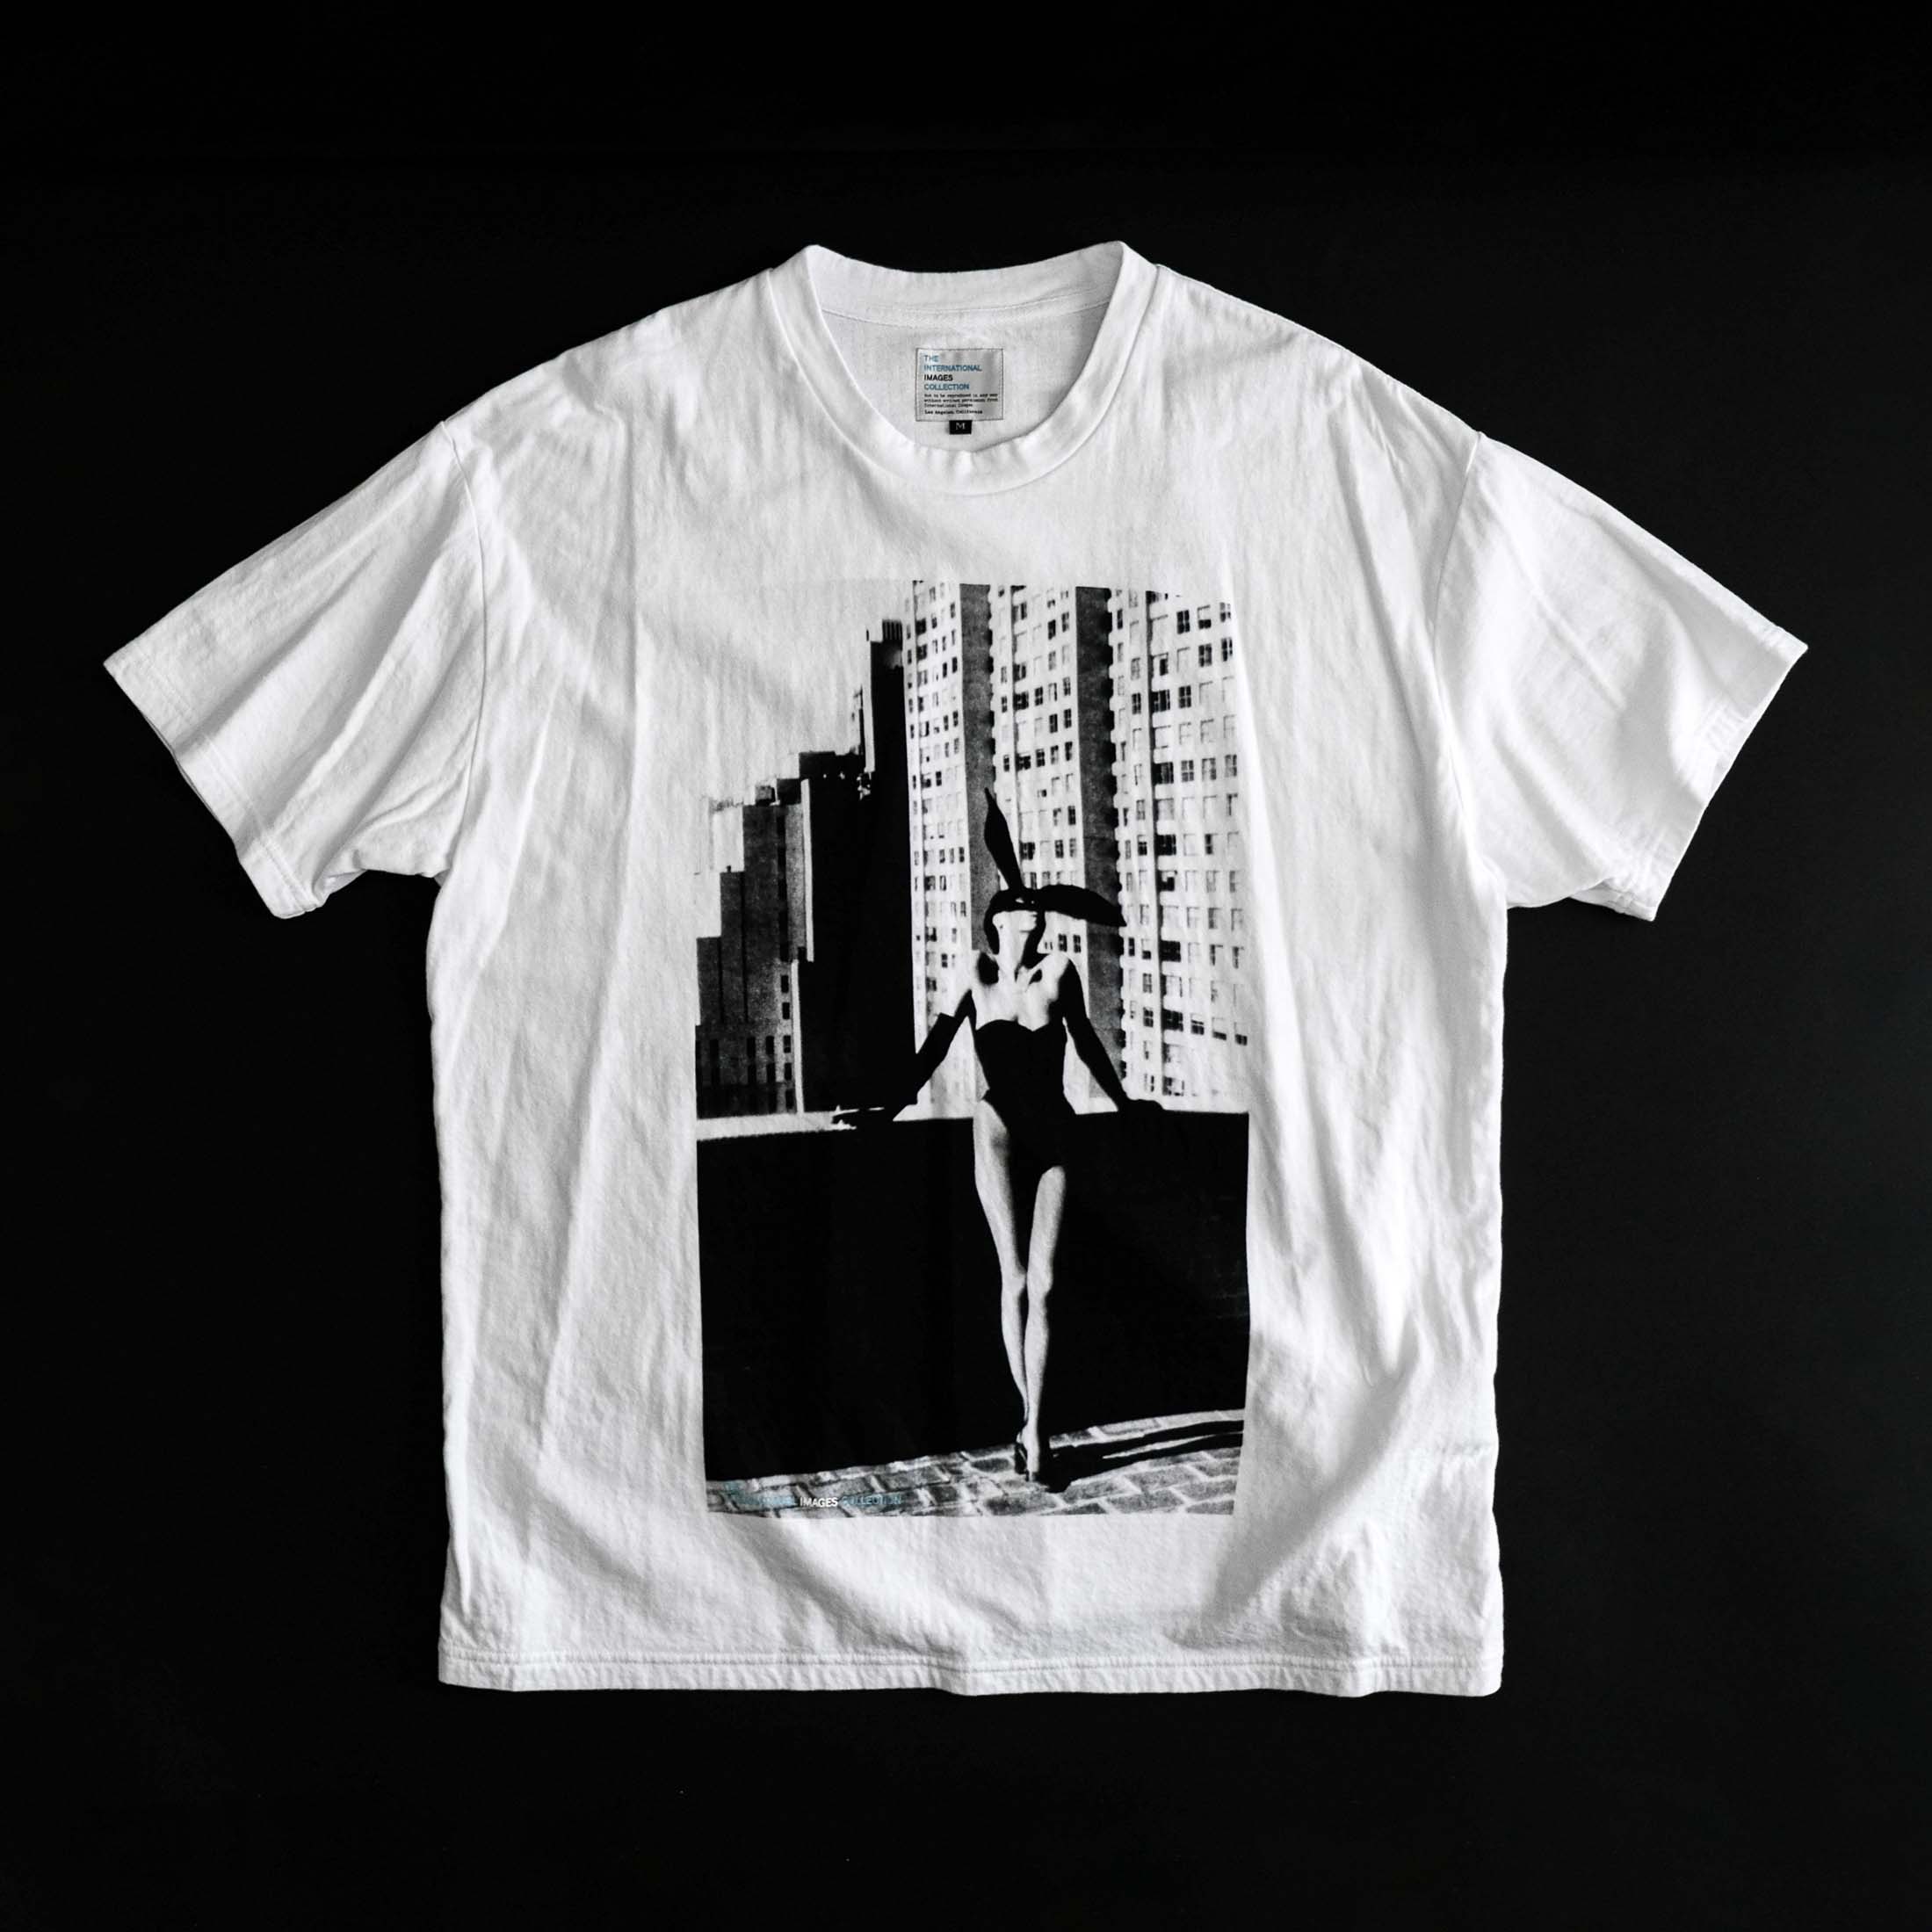 INTERNATIONAL IMAGES COLLECTION / GRAPHIC T-SHIRT (PLAYBOY BUNNY)